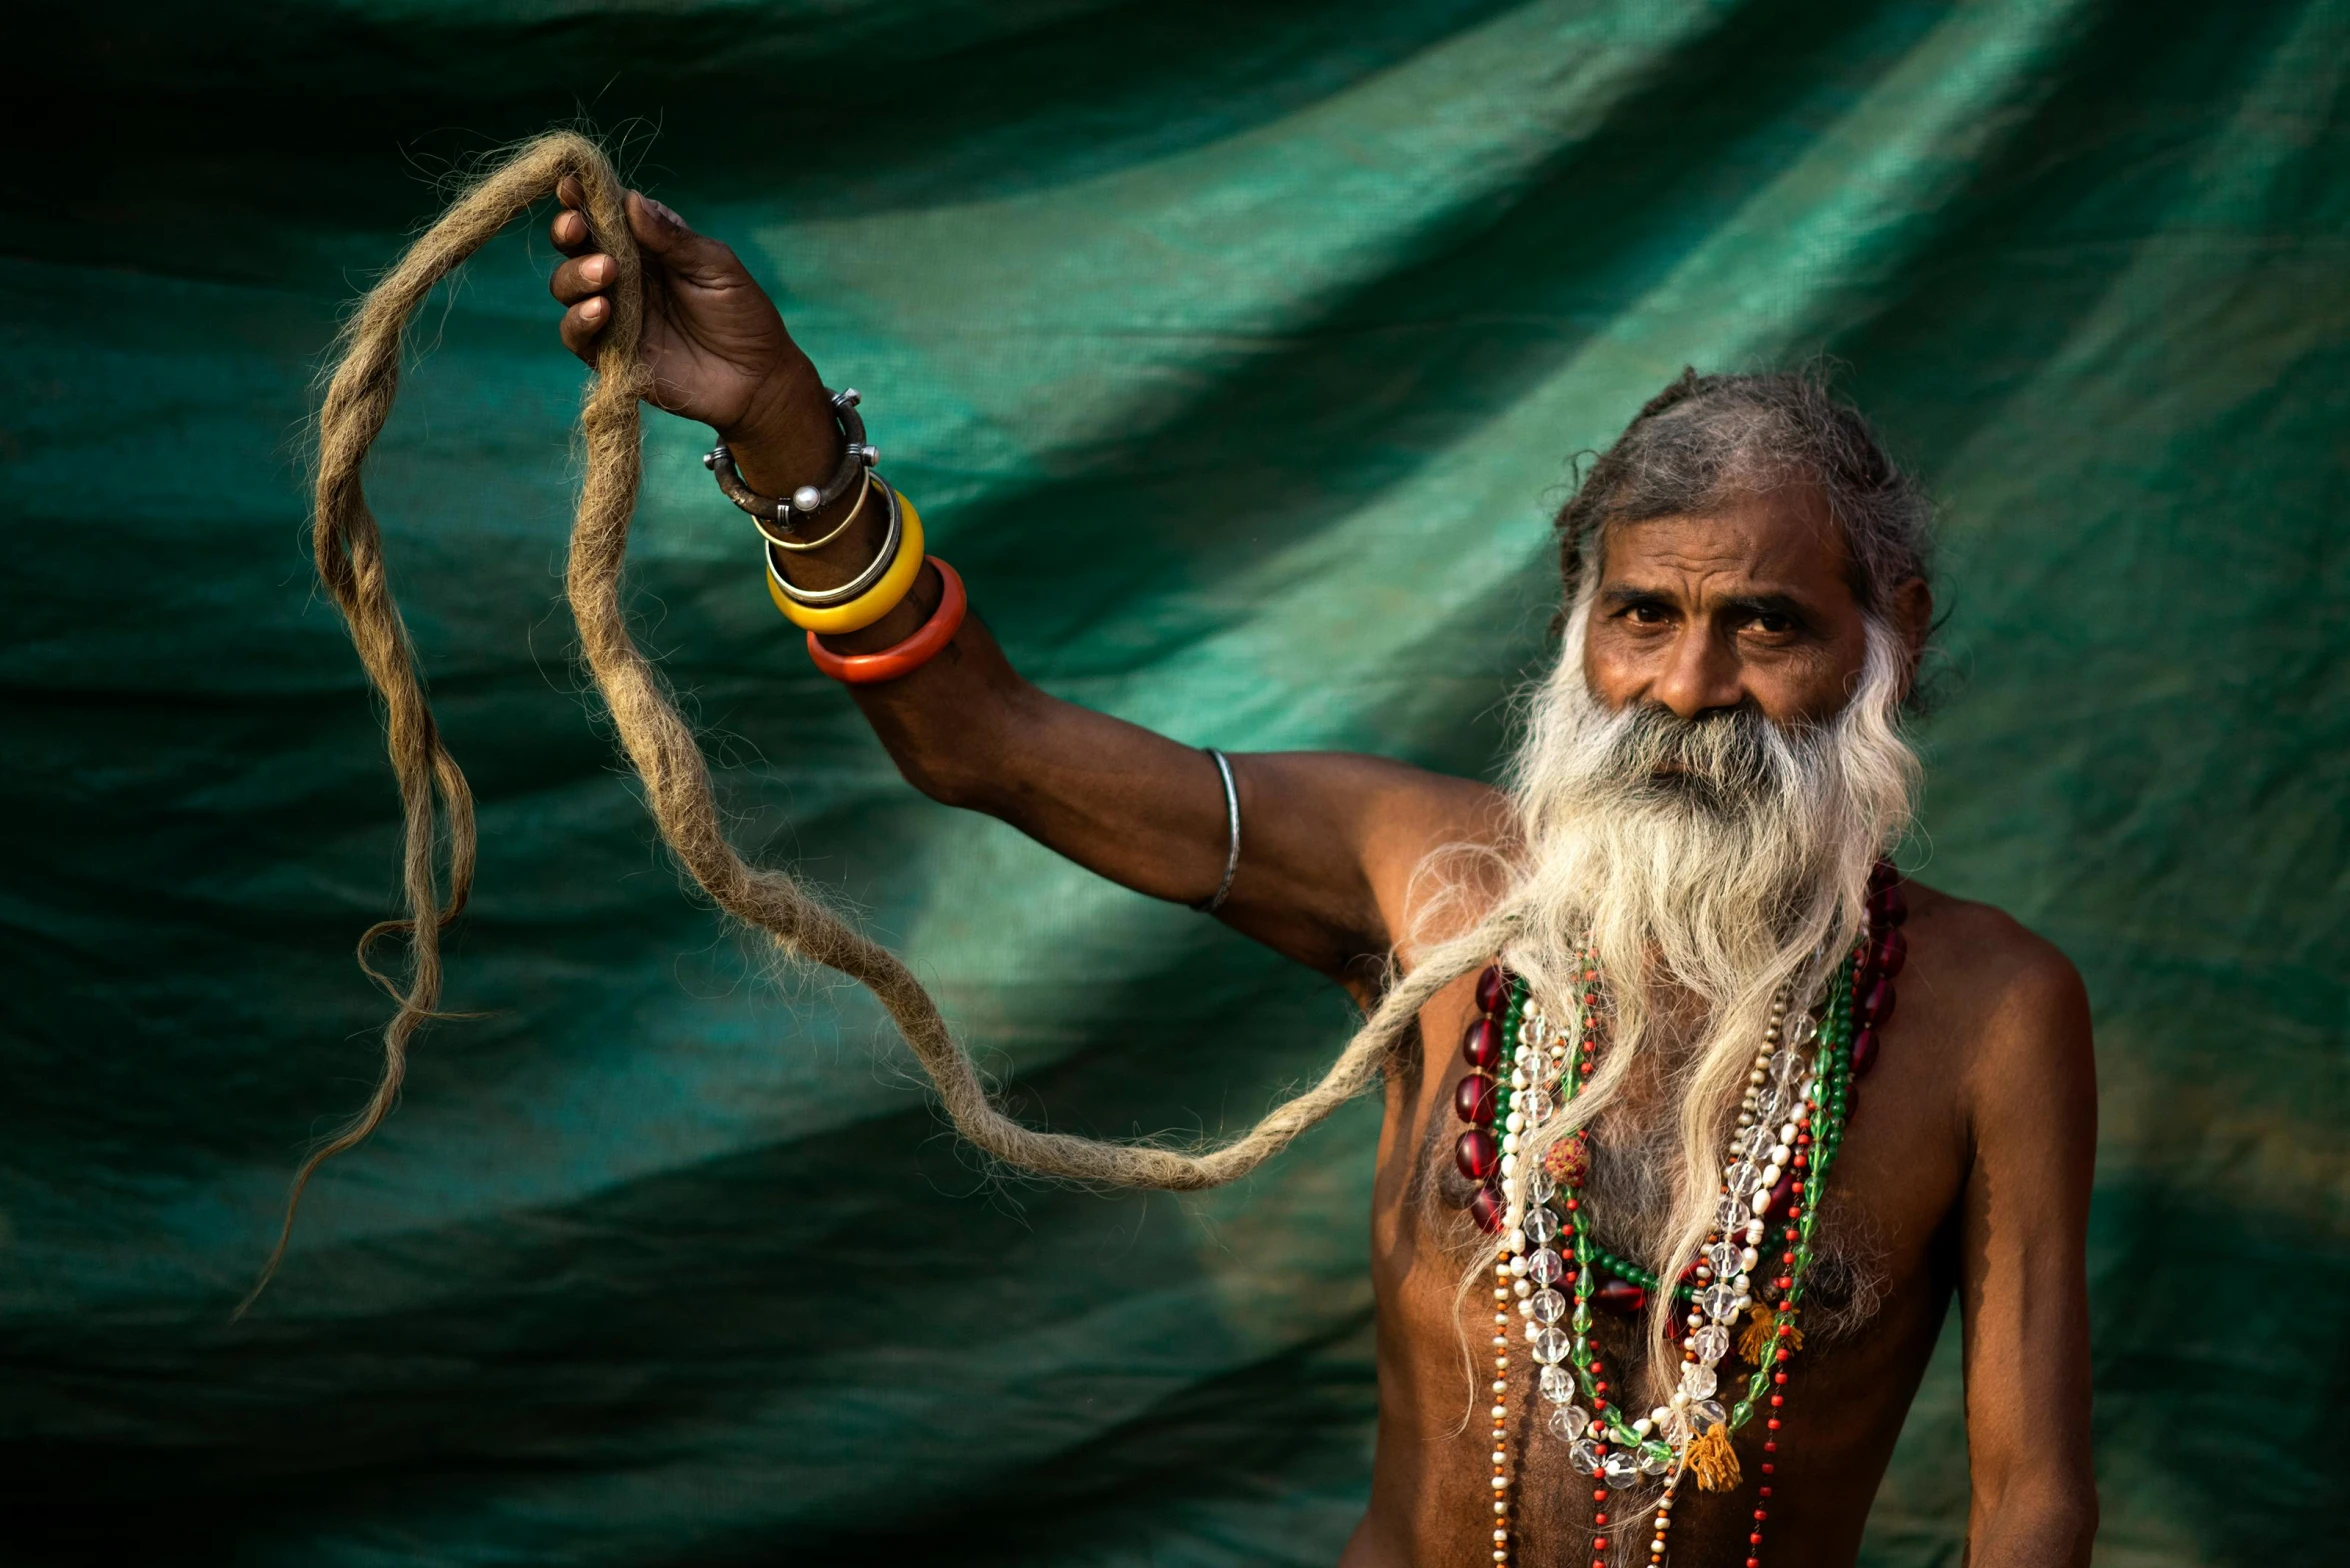 a man with a long white beard holding a rope, pexels contest winner, samikshavad, colourful long hair, wearing loincloth, a black man with long curly hair, oldman with mustach